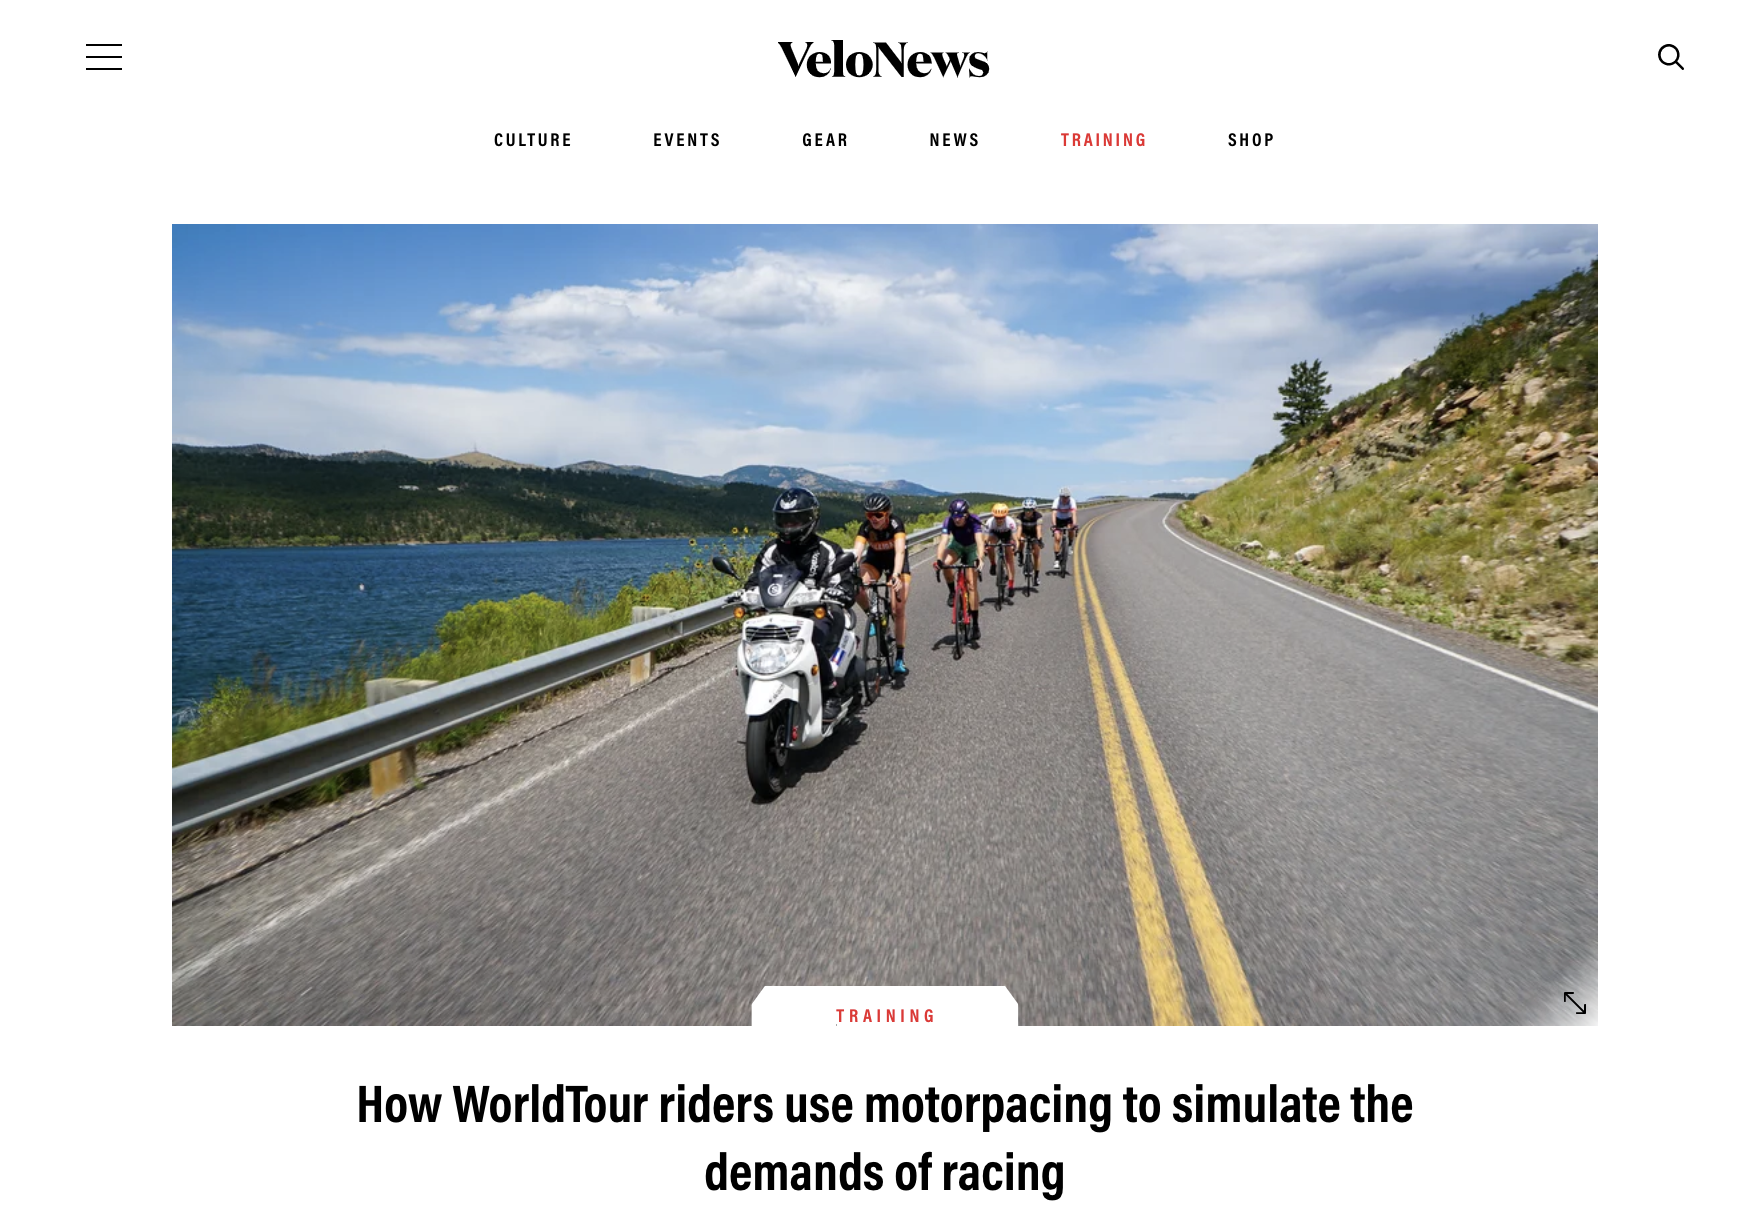 How WorldTour riders use motorpacing to simulate the demands of racing